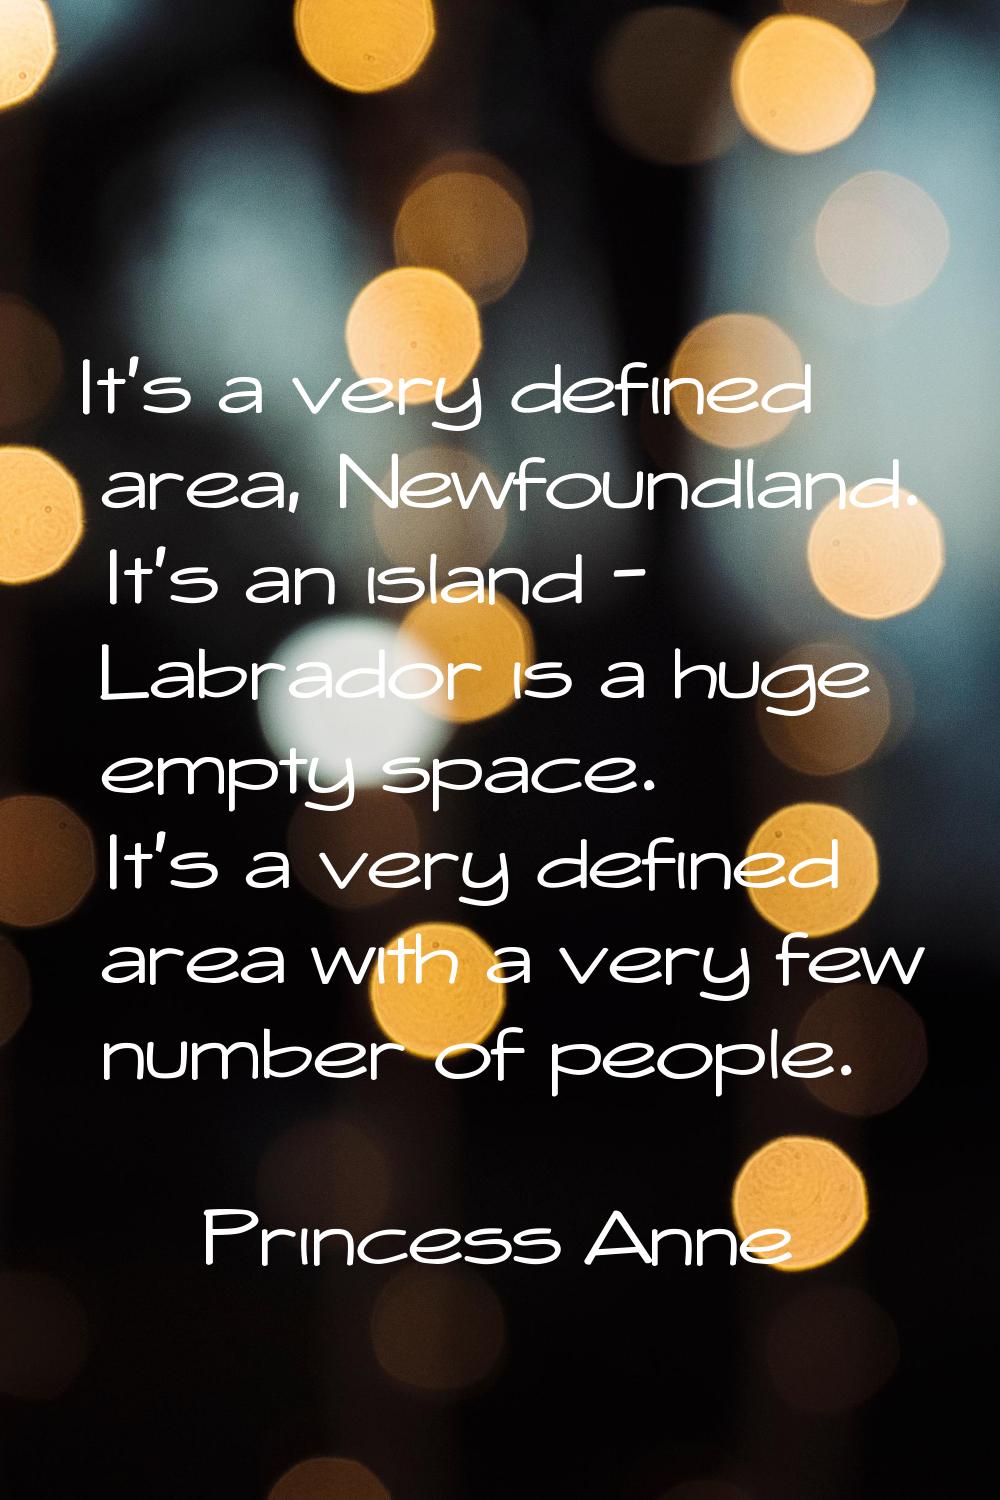 It's a very defined area, Newfoundland. It's an island - Labrador is a huge empty space. It's a ver